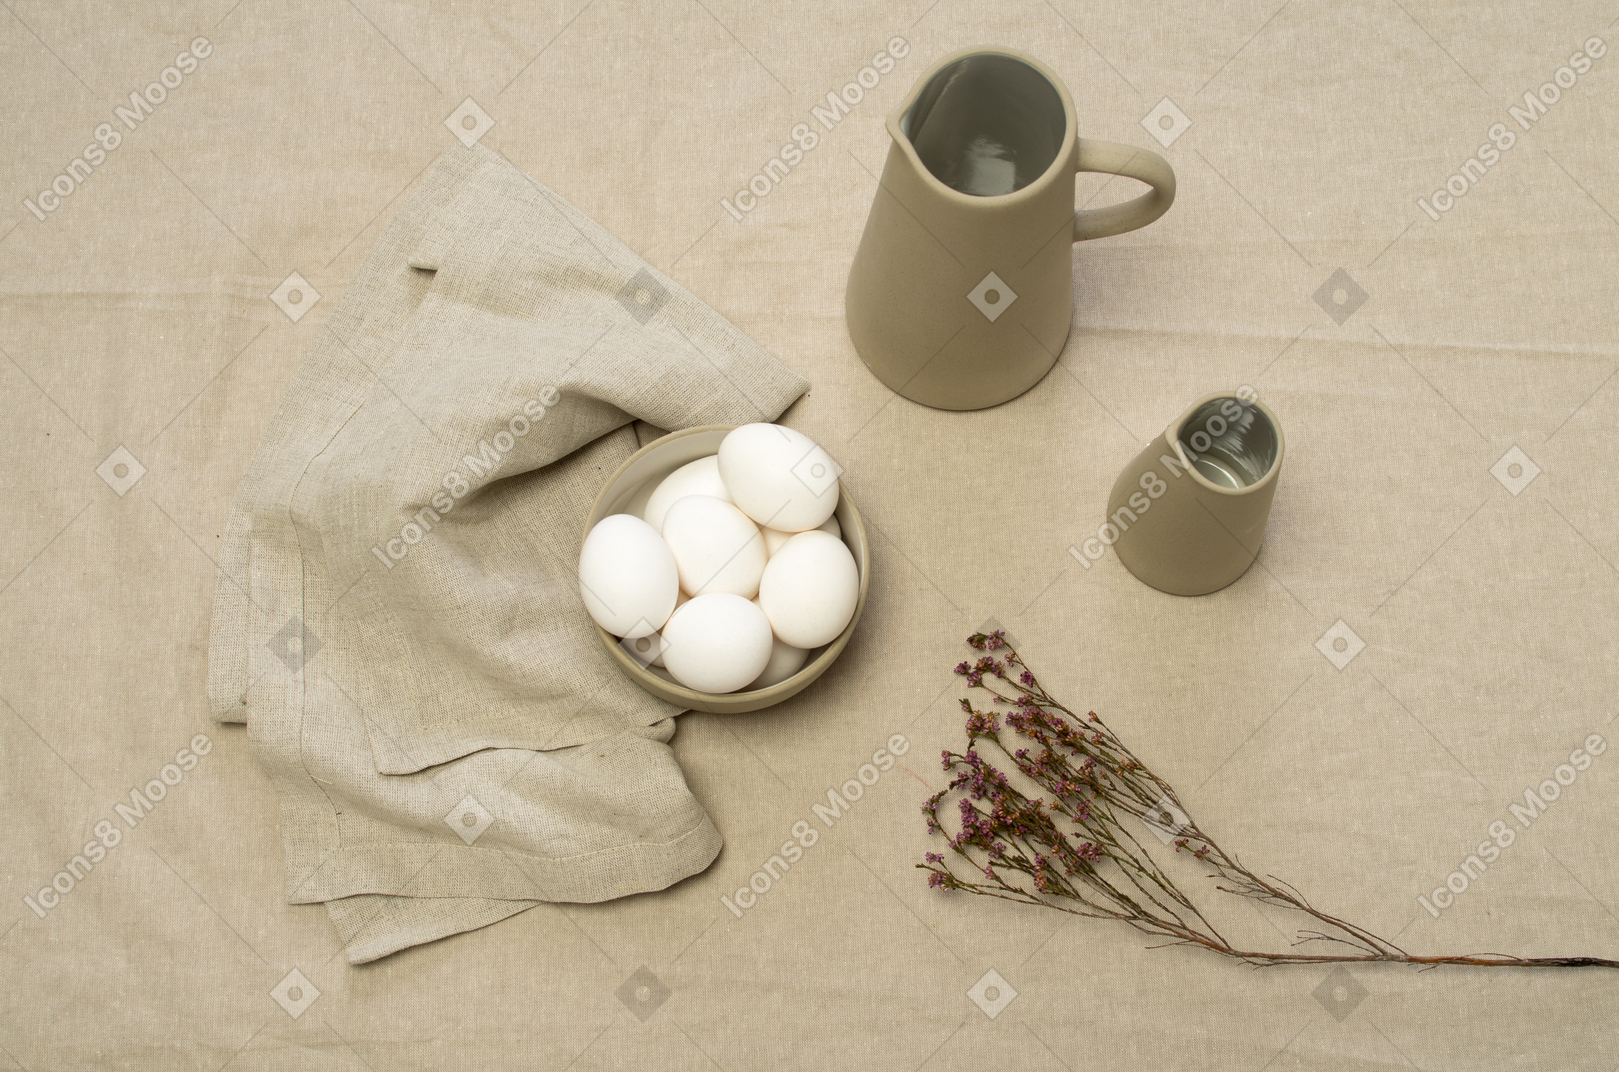 A bowl of chicken eggs and some jars on a grey tablecloth